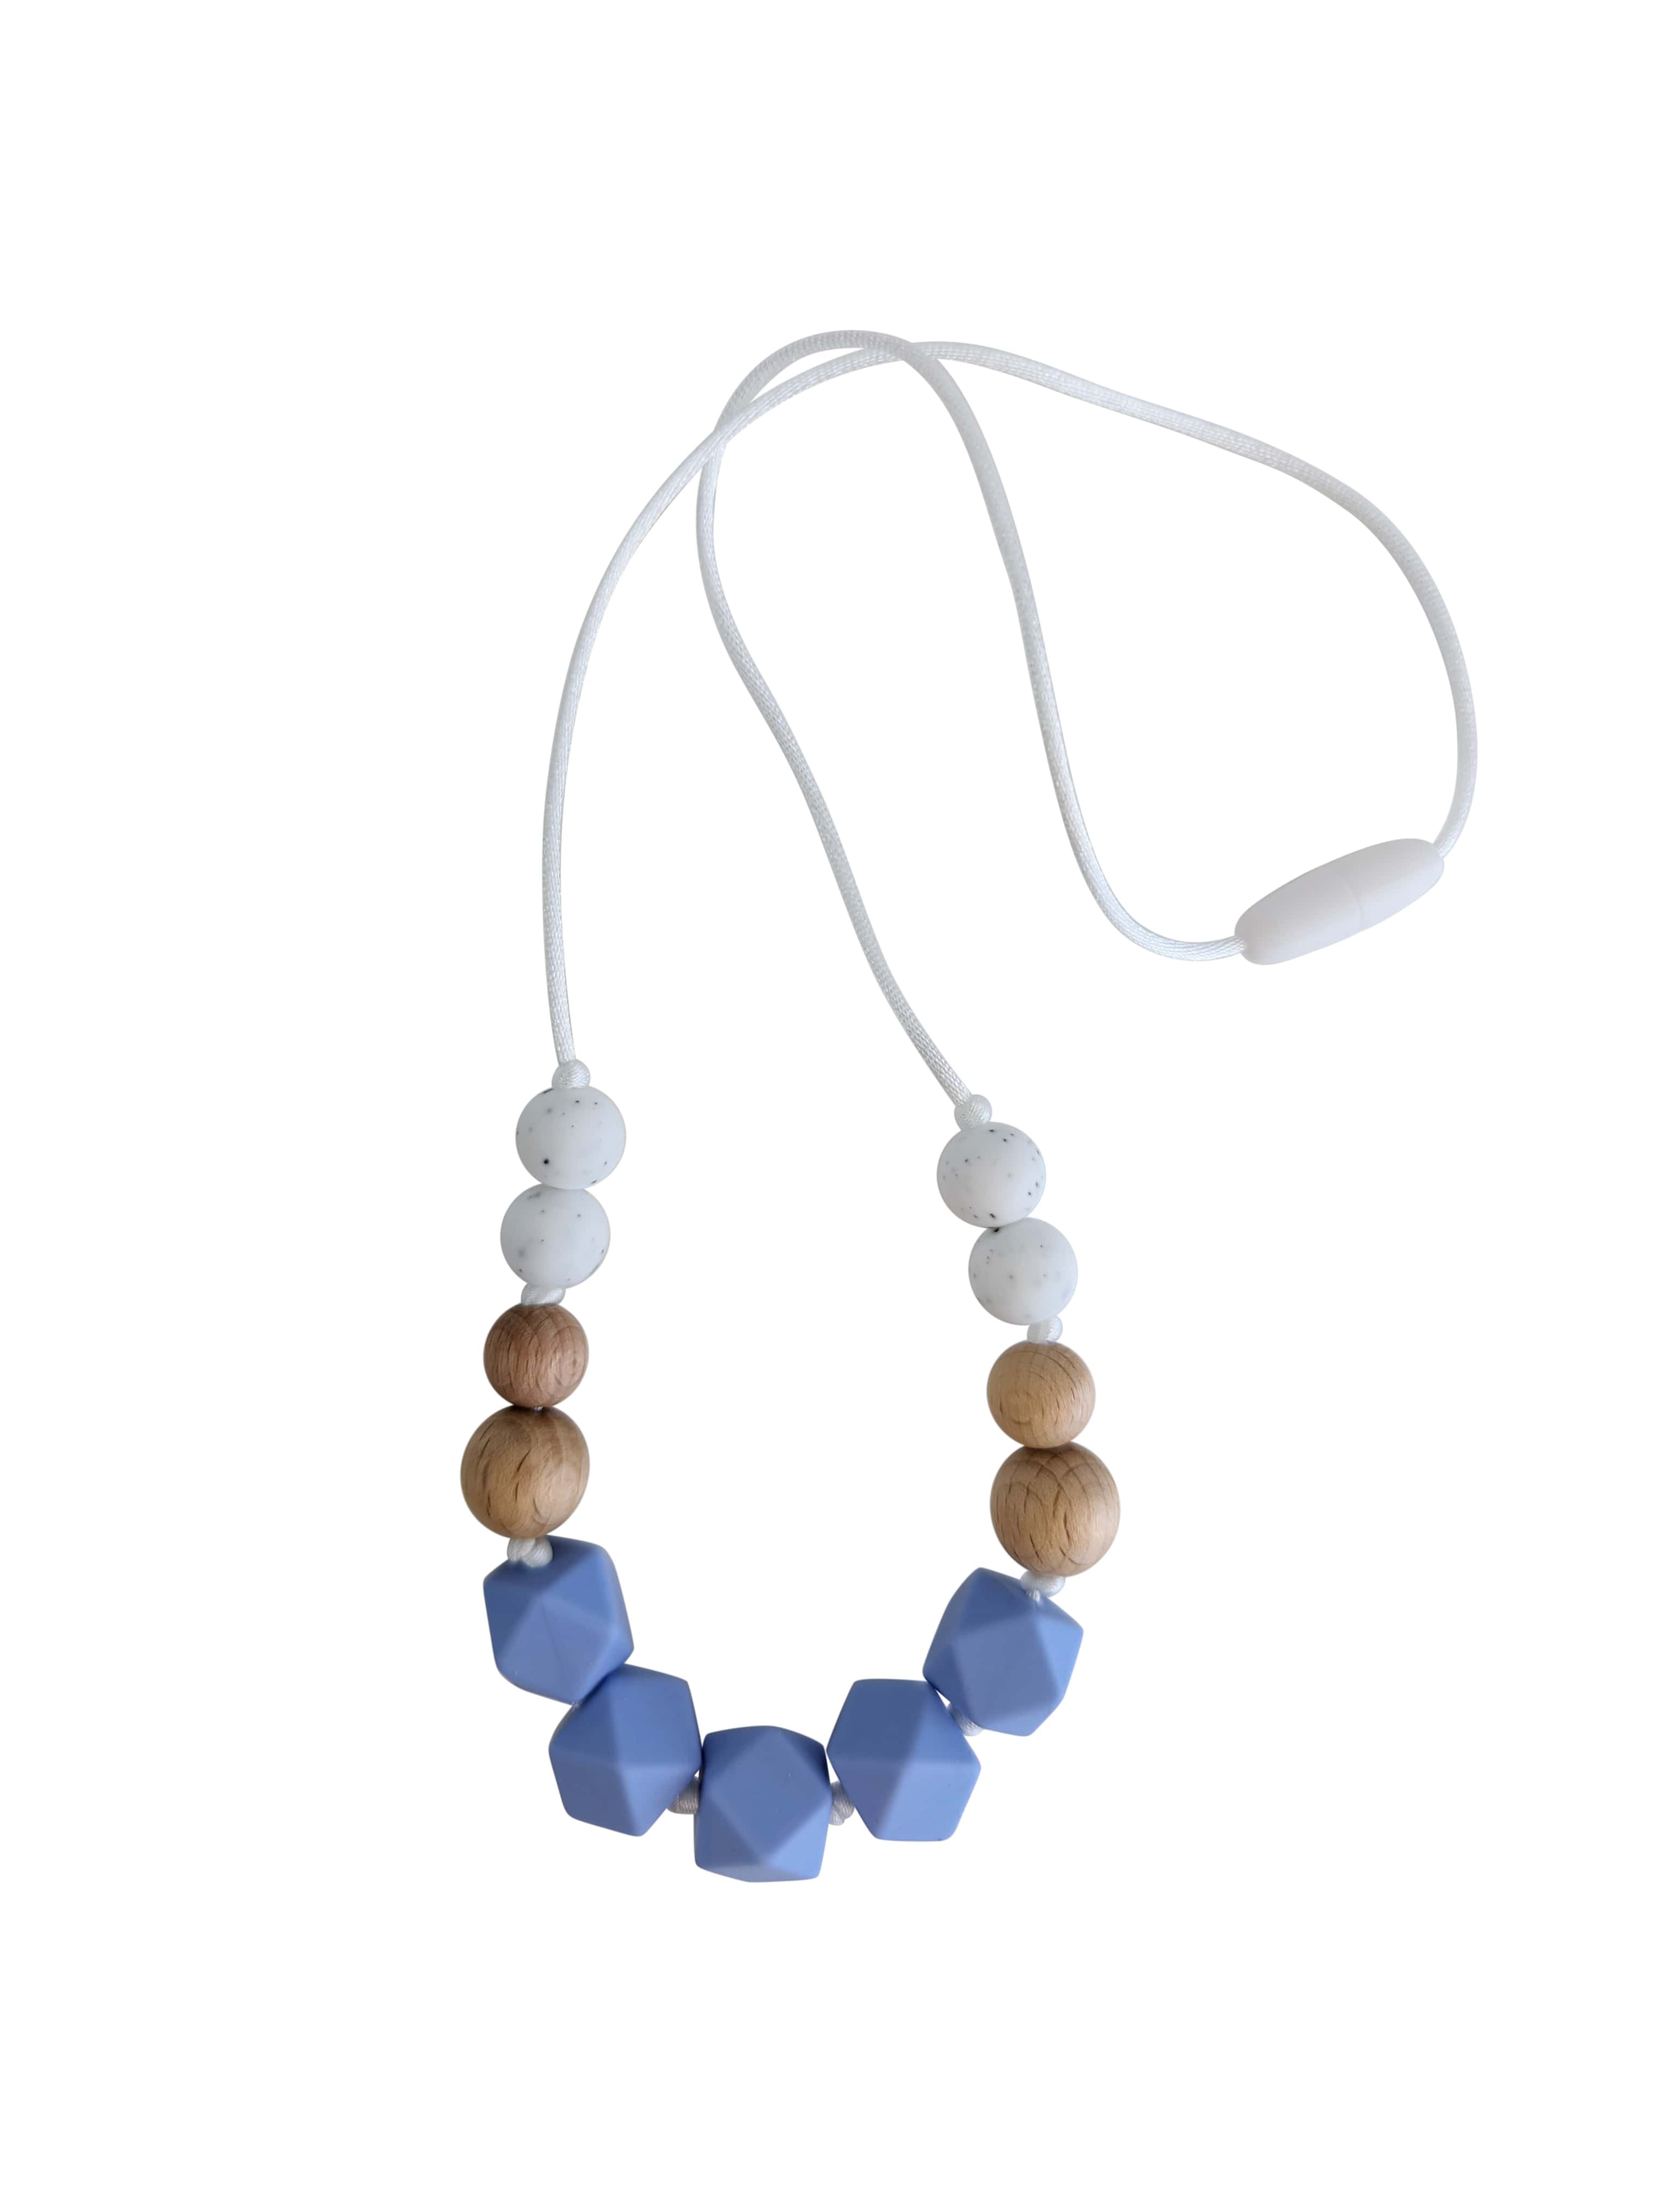 Blue, wood and speckled teething necklace